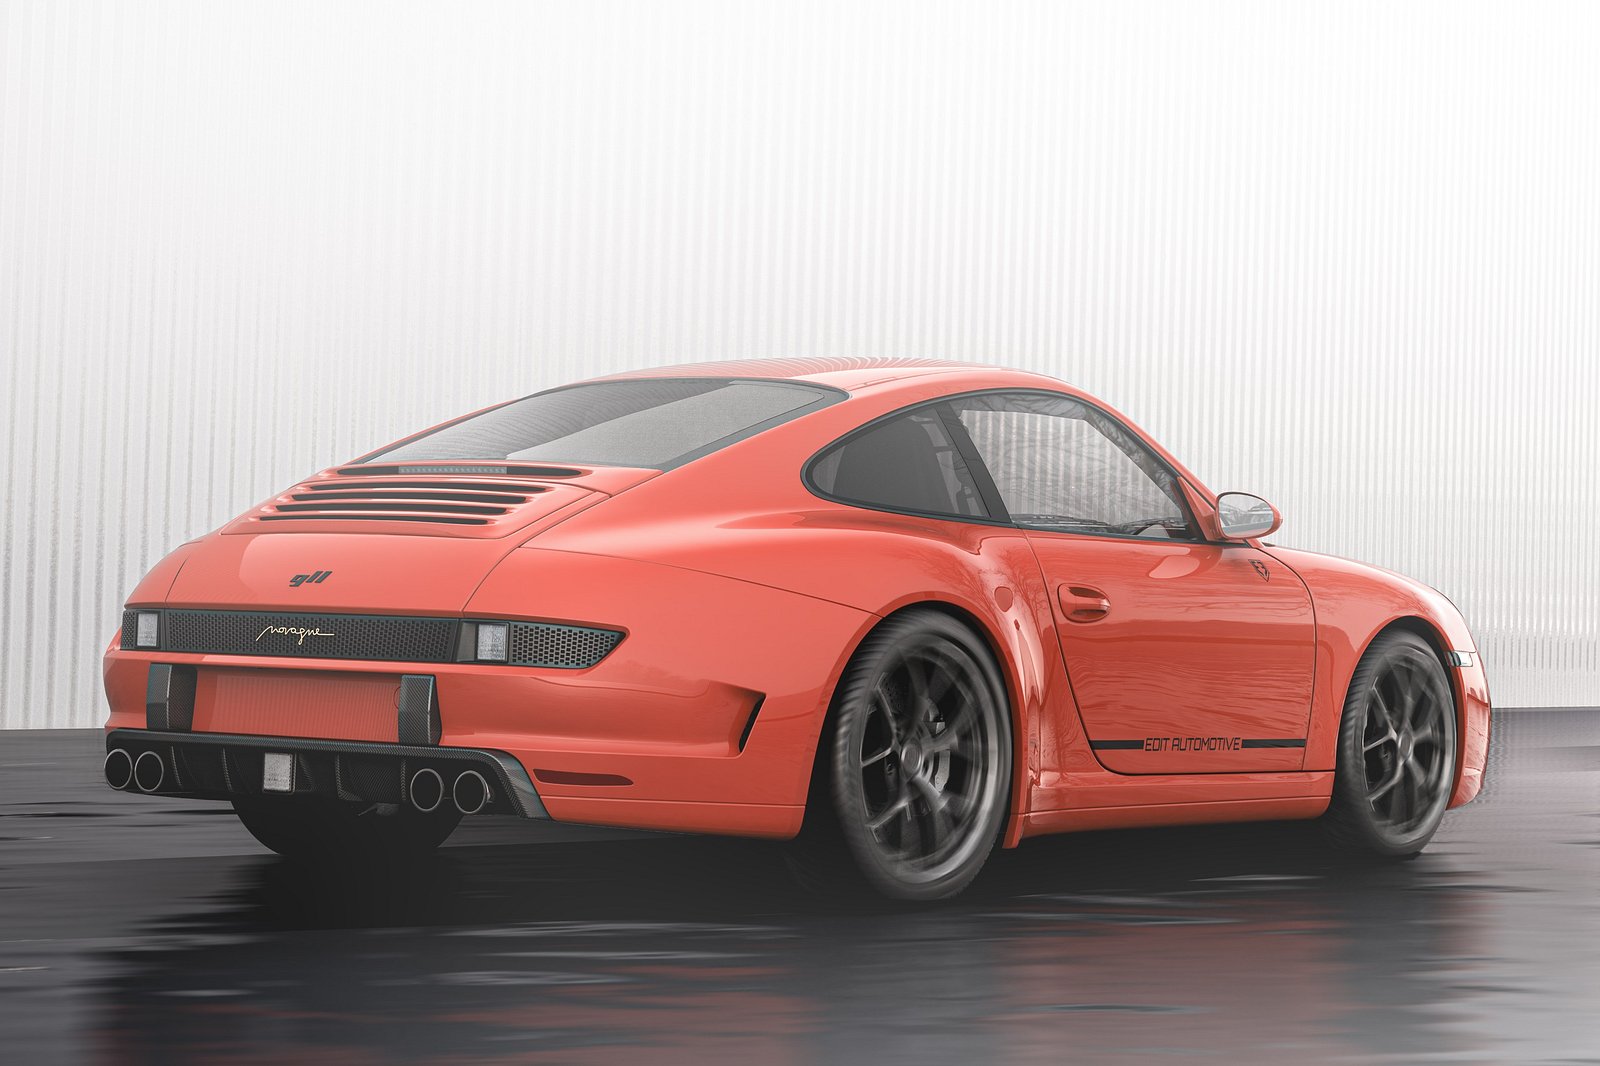 Is This Porsche 997 From The Mid-2000s Really A Restomod? - The